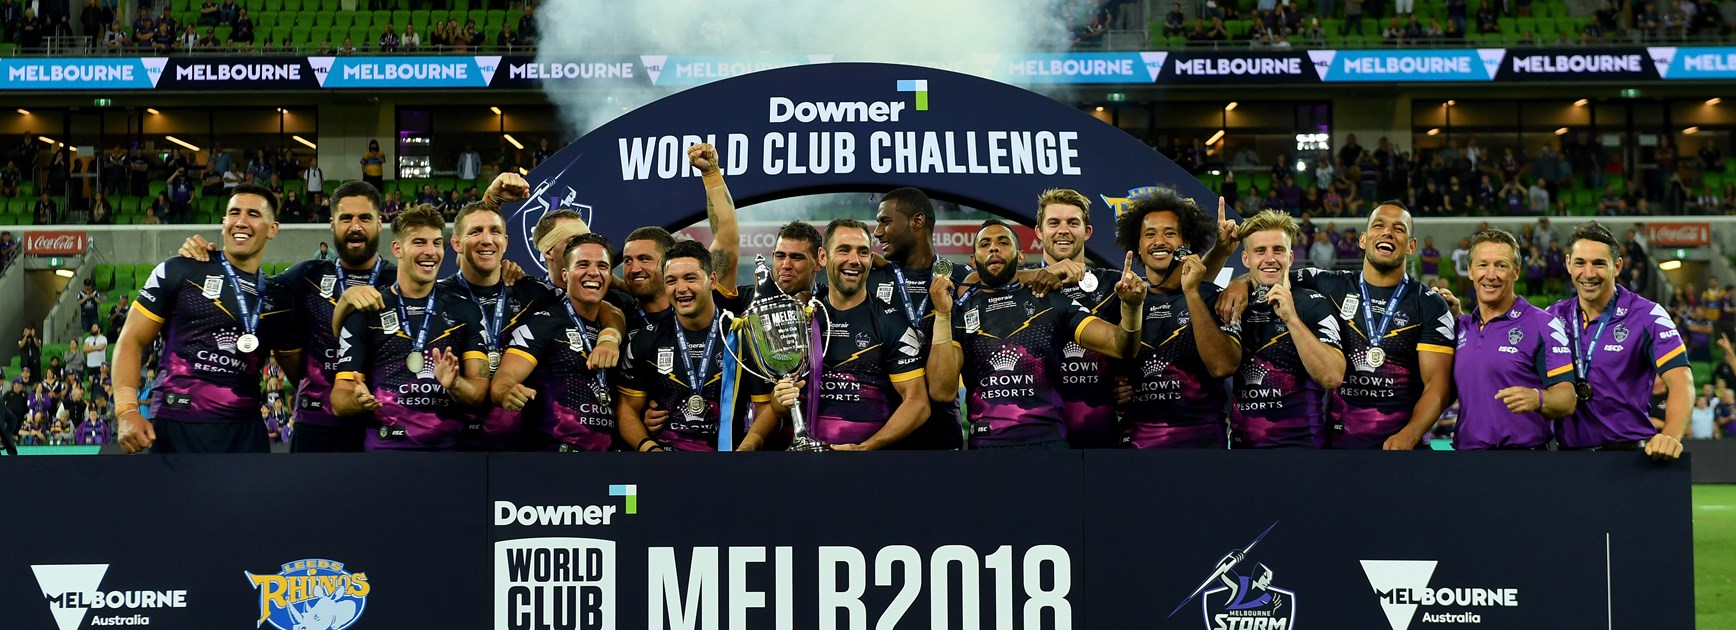 The Melbourne Storm celebrate their World Club Challenge win.